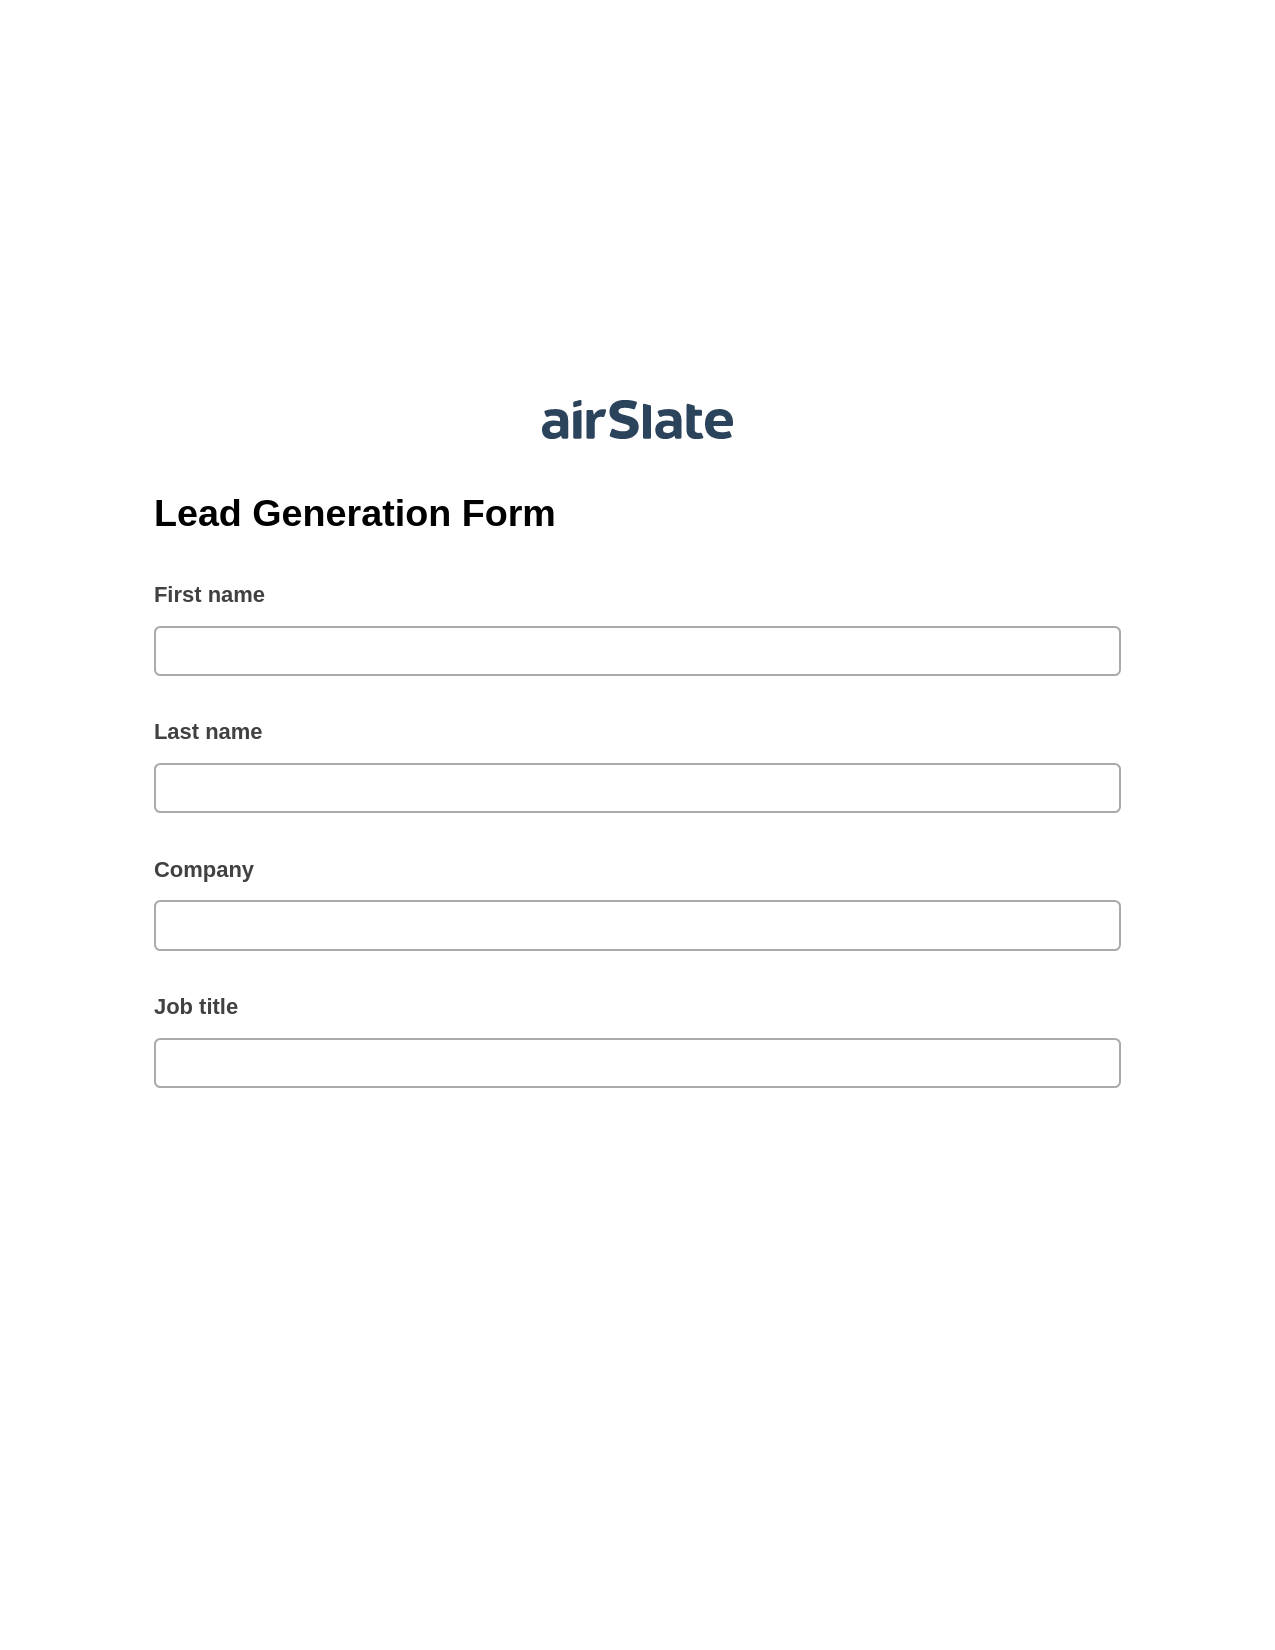 Lead Generation Form Pre-fill from MySQL Bot, Remove Tags From Slate Bot, Export to Excel 365 Bot